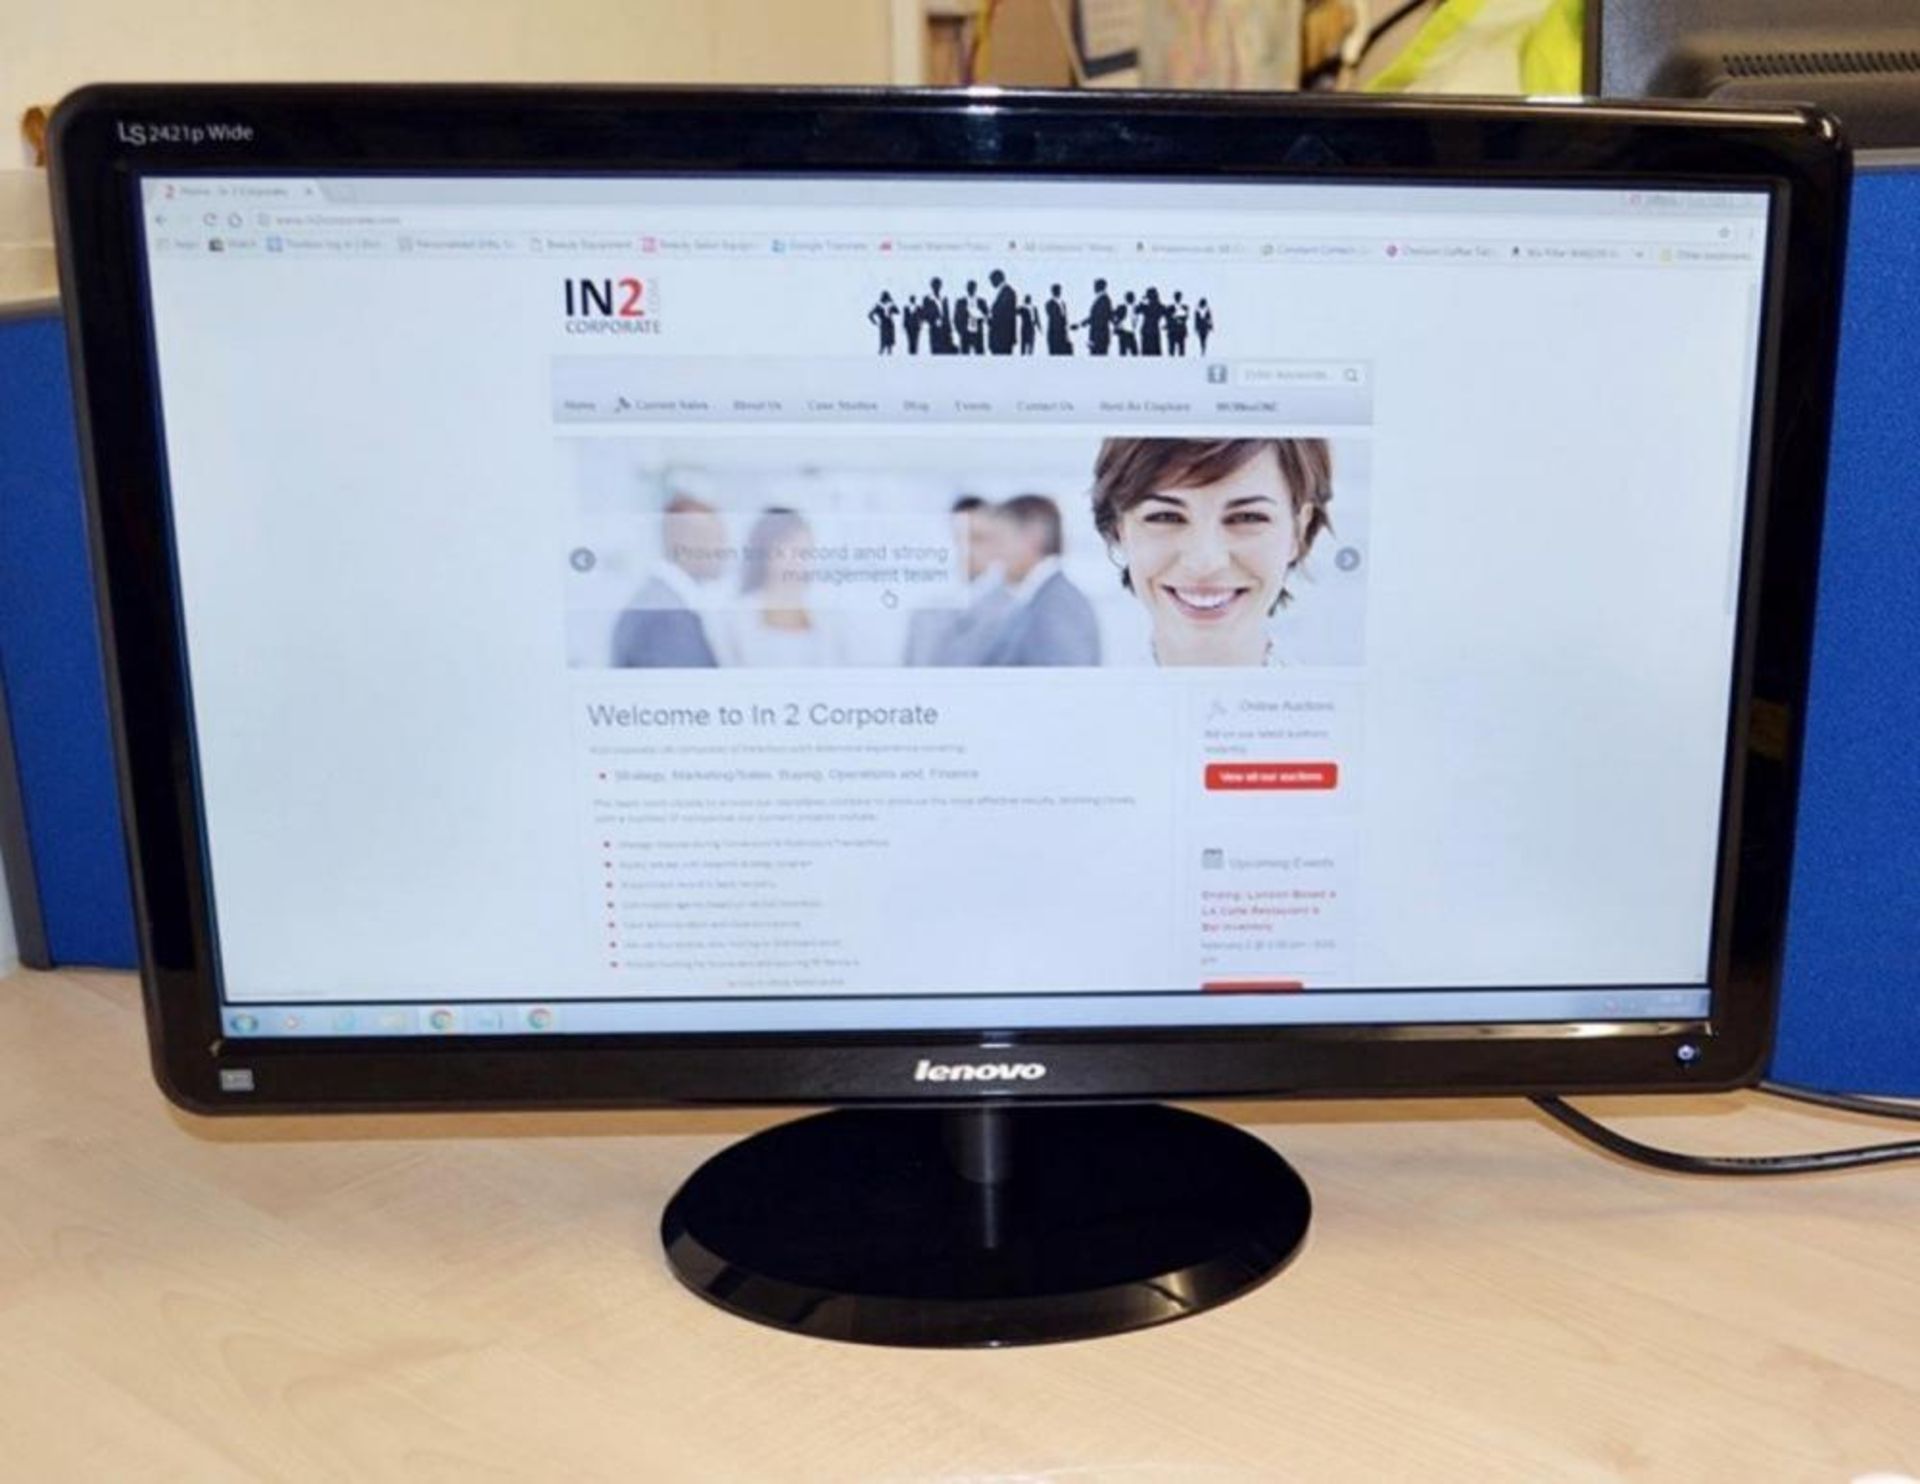 2 x Lenovo LS2421p Wide 23.6" Full HD LED TFT Monitors (Model: 4015-LS1) - Recently Taken From A - Image 2 of 11